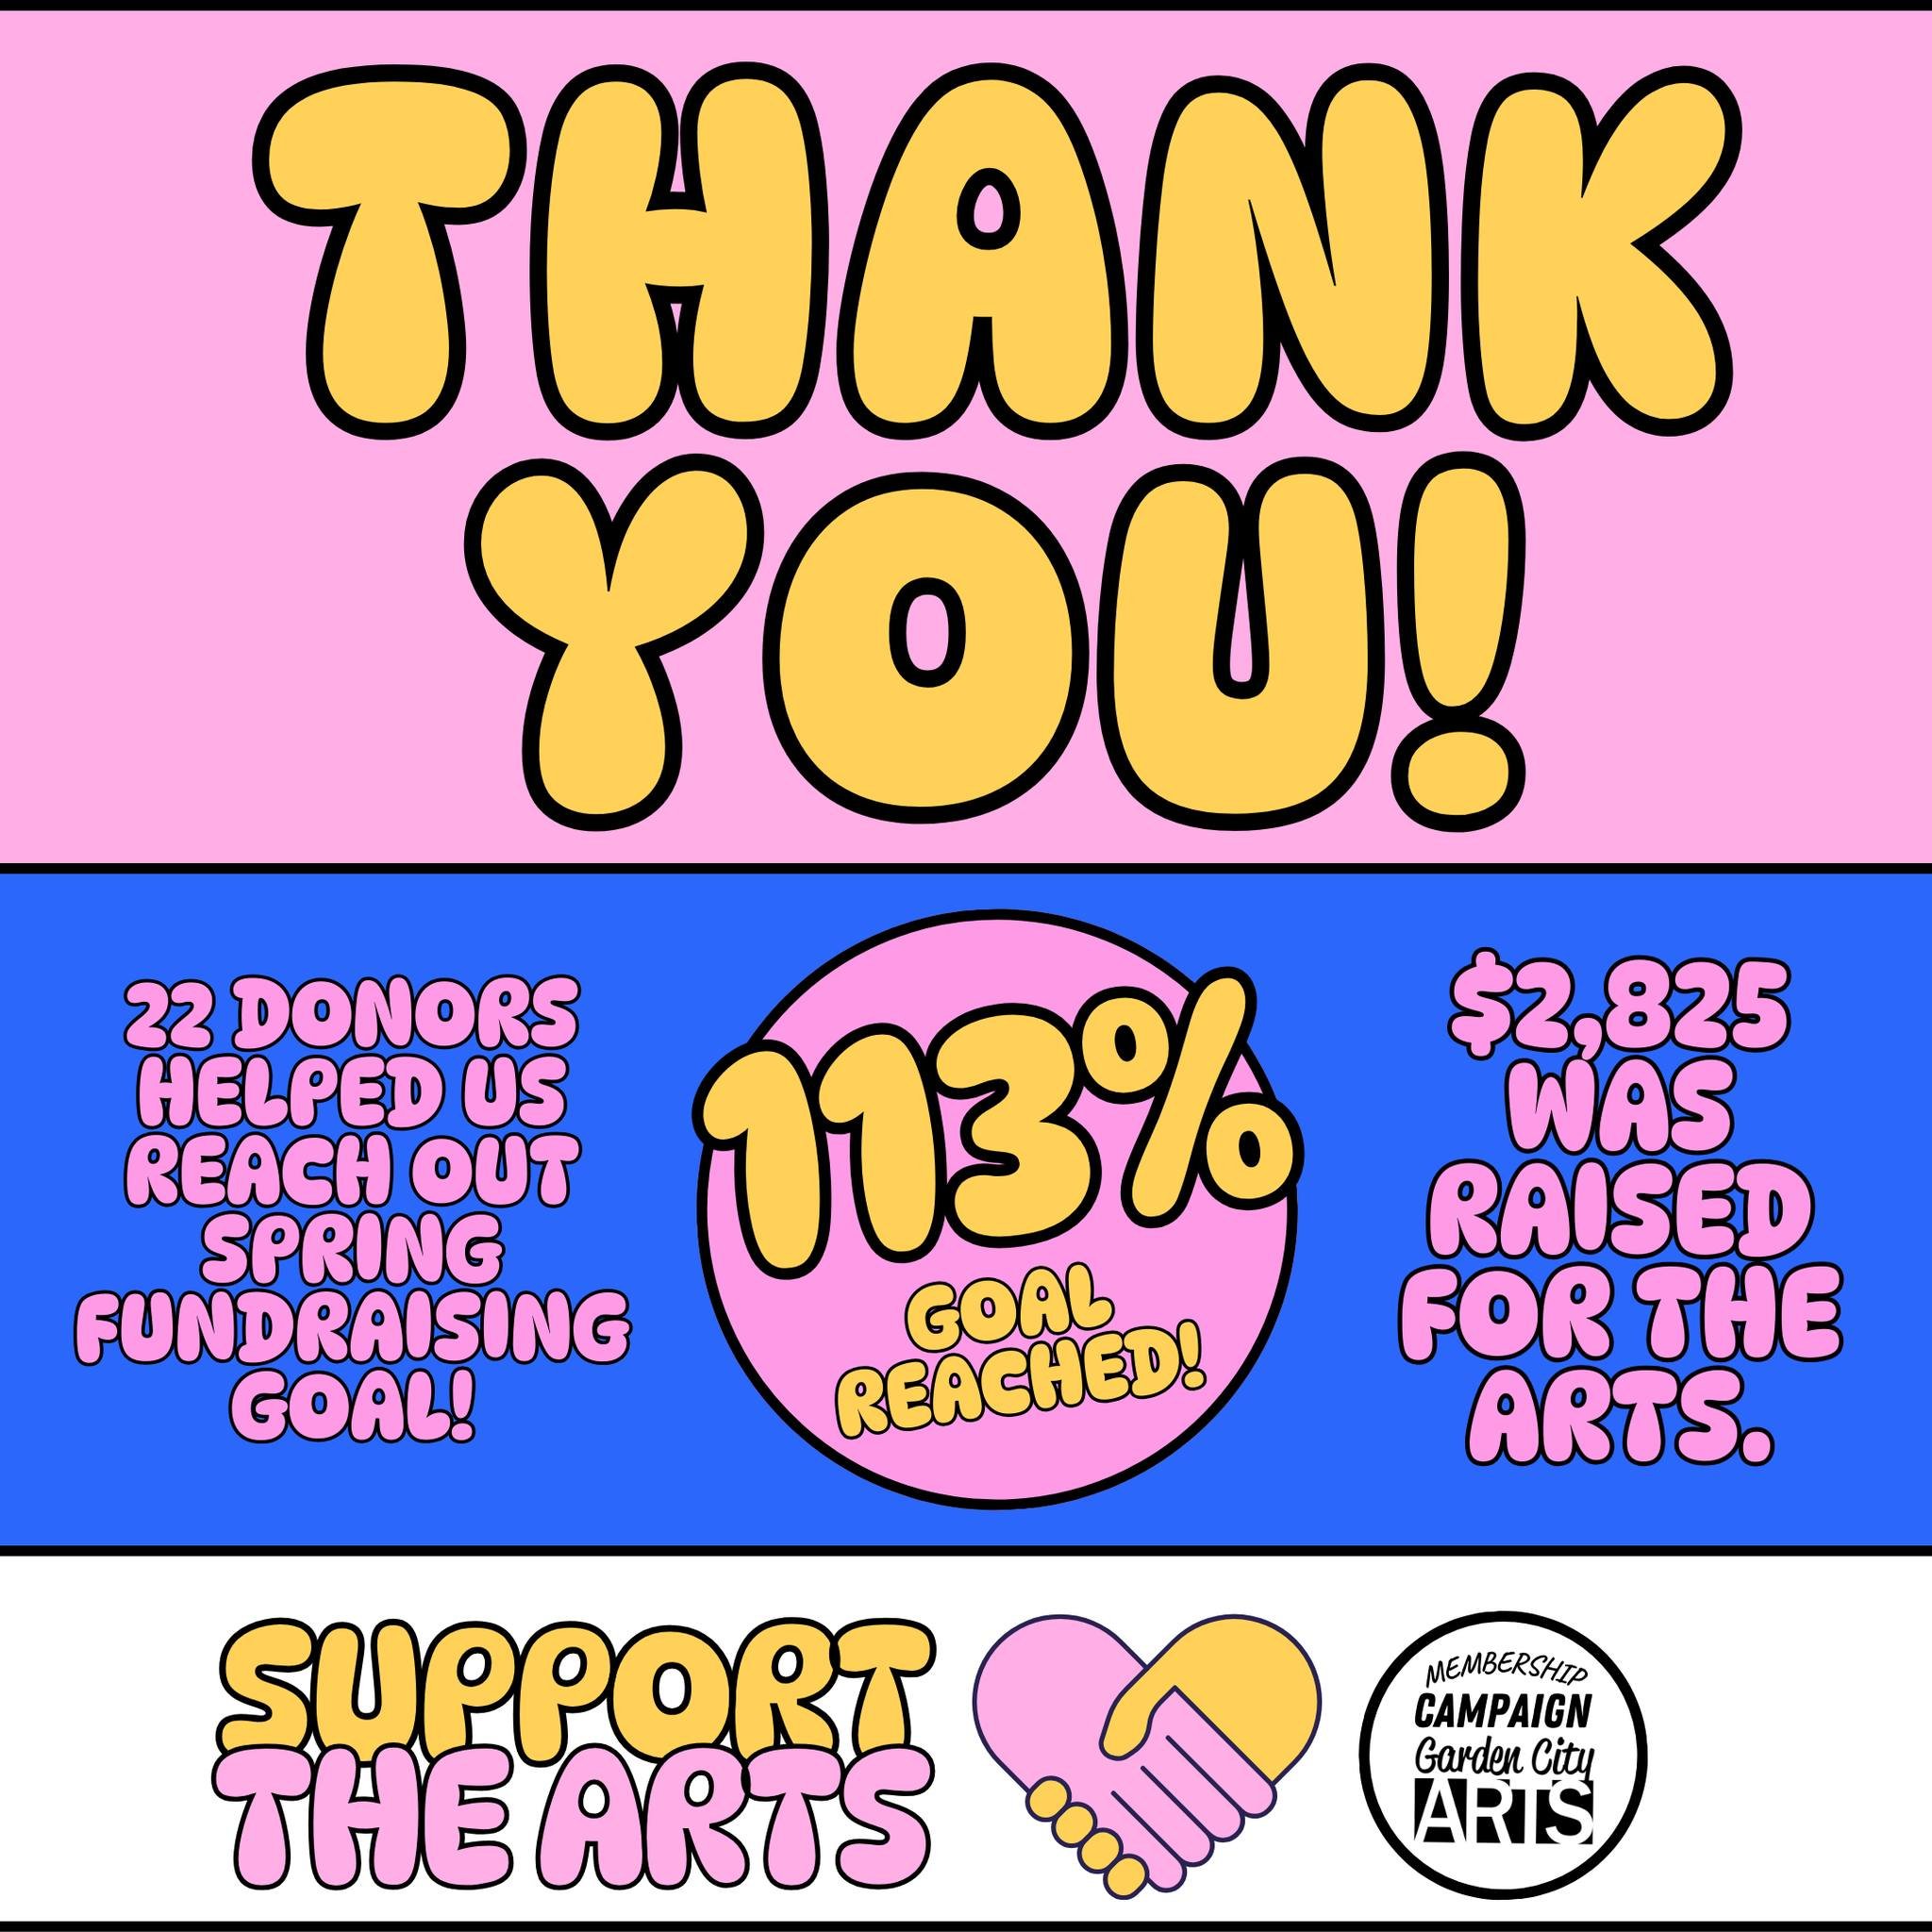 Everyone here at Garden City Arts would like to say a huge thank you to the community for helping us reach our spring fundraising goal! To everyone who donated, shared our posts, or rooted for us, we greatly appreciate you. With your help, the staff,